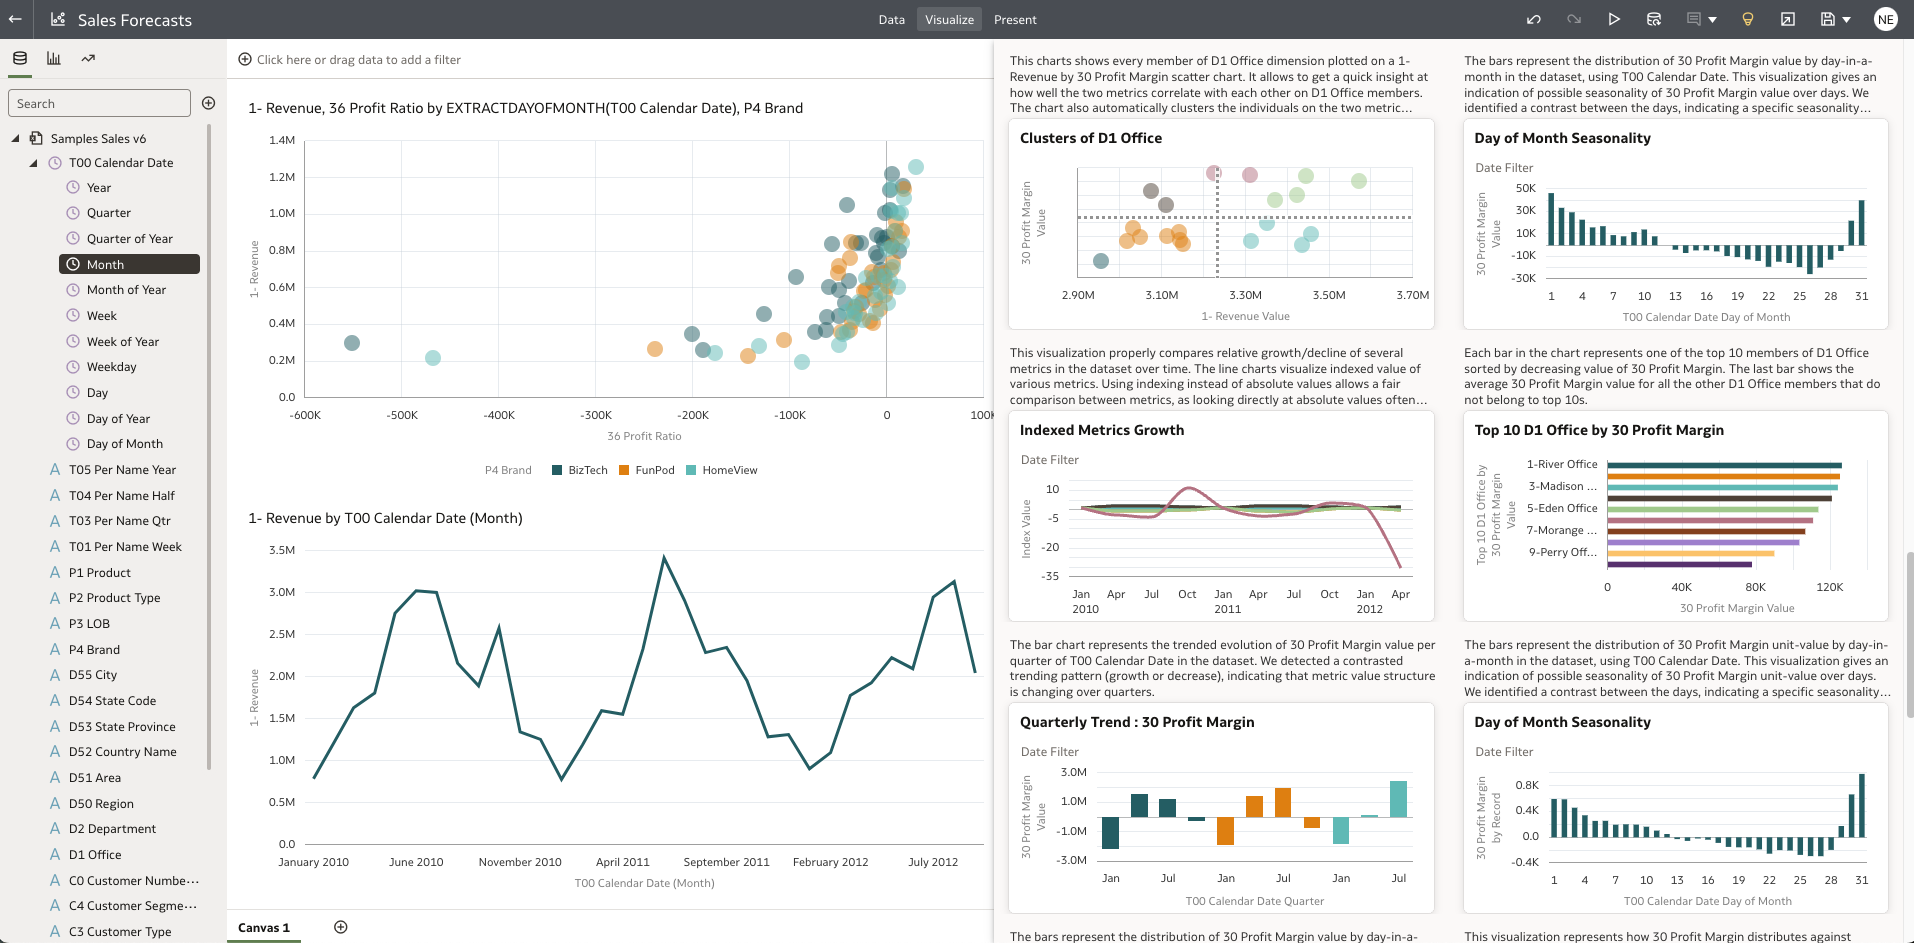 Datasets are automatically processed and machine-generated insights created. These insights highlight trends, patterns, and correlations in the data that may have been missed. Easily add these to the canvas with one click to jump-start analytics stories.